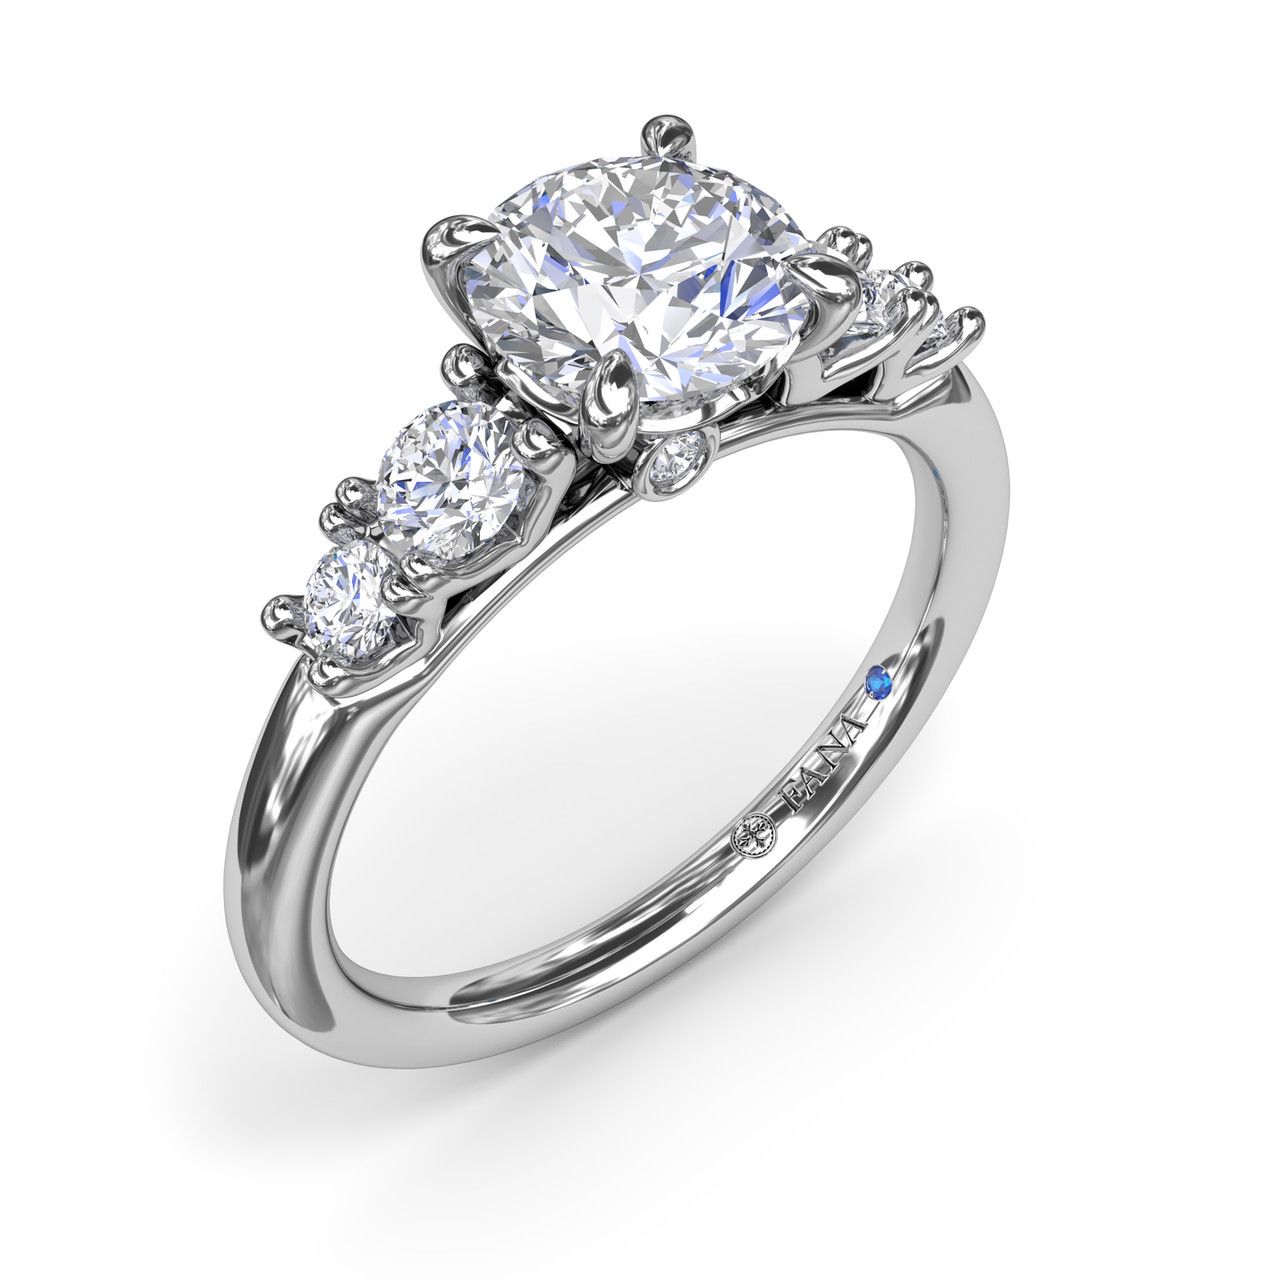 14K WHITE GOLD SEMI-MOUNT RING SIZE 6.5 WITH 6=0.36TW ROUND G-H VS2-SI1 DIAMONDS AND ONE ROUND BLUE SAPPHIRE  (3.28 GRAMS)